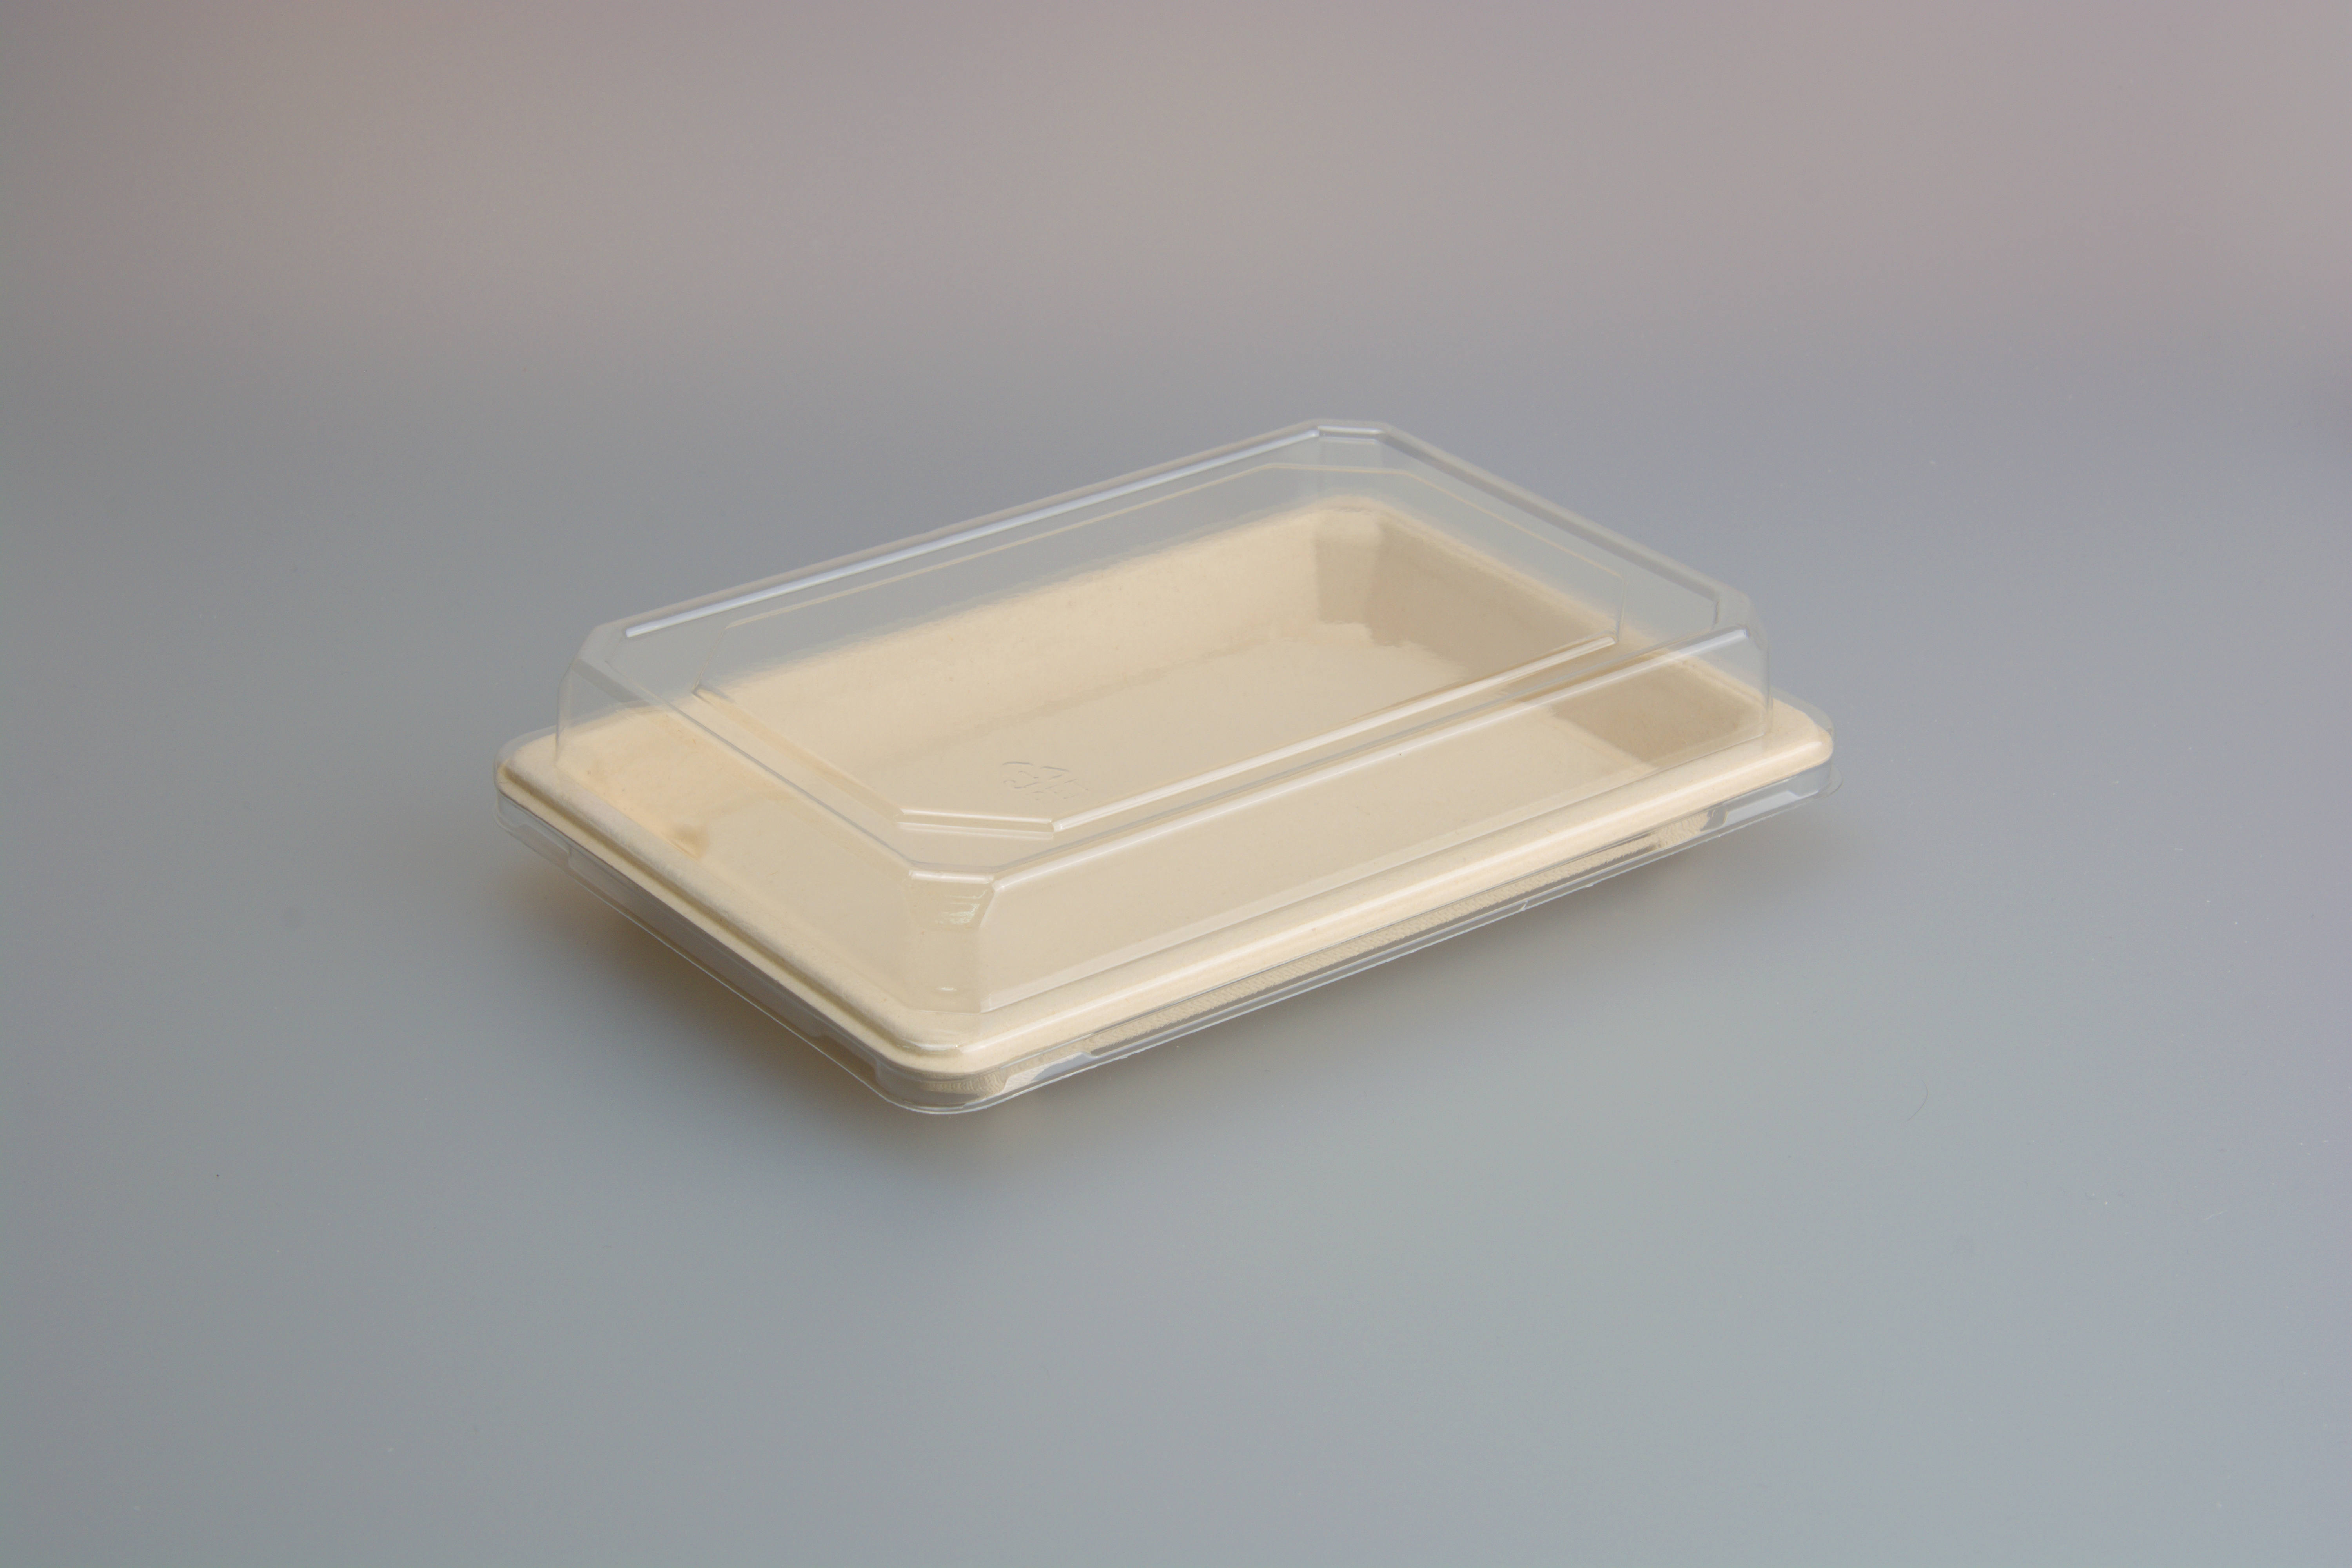 8 Year Exporter Biodegradable Sushi Tray - 7.3*5.0 INCH Sushi Trays, Disposable Sushi Containers With Lids – Short, Take Out Containers For Appetizers, Entrees, or Desserts, Black Plastic To...